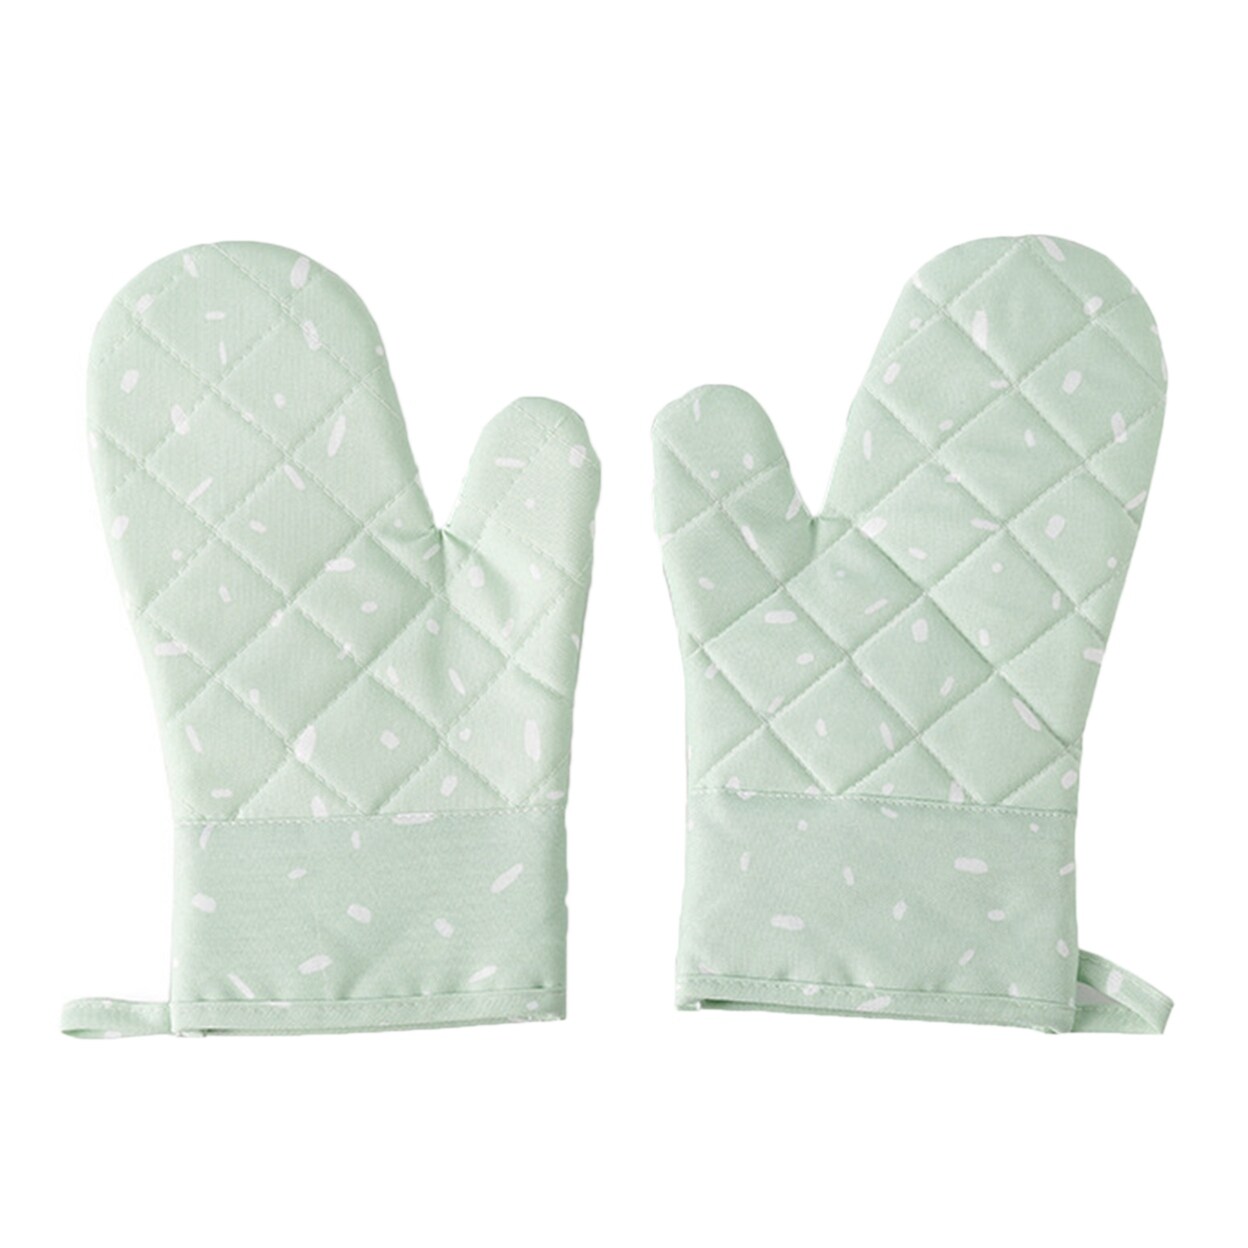 https://ak1.ostkcdn.com/images/products/is/images/direct/d7a4bcac53cbabf08d1dce52c13786d55351a309/1-Pair-Oven-Gloves-AntiSkid-Heat-Insulation-Fabric-Thicker-Baking-Mitts-For-Kitchen.jpg